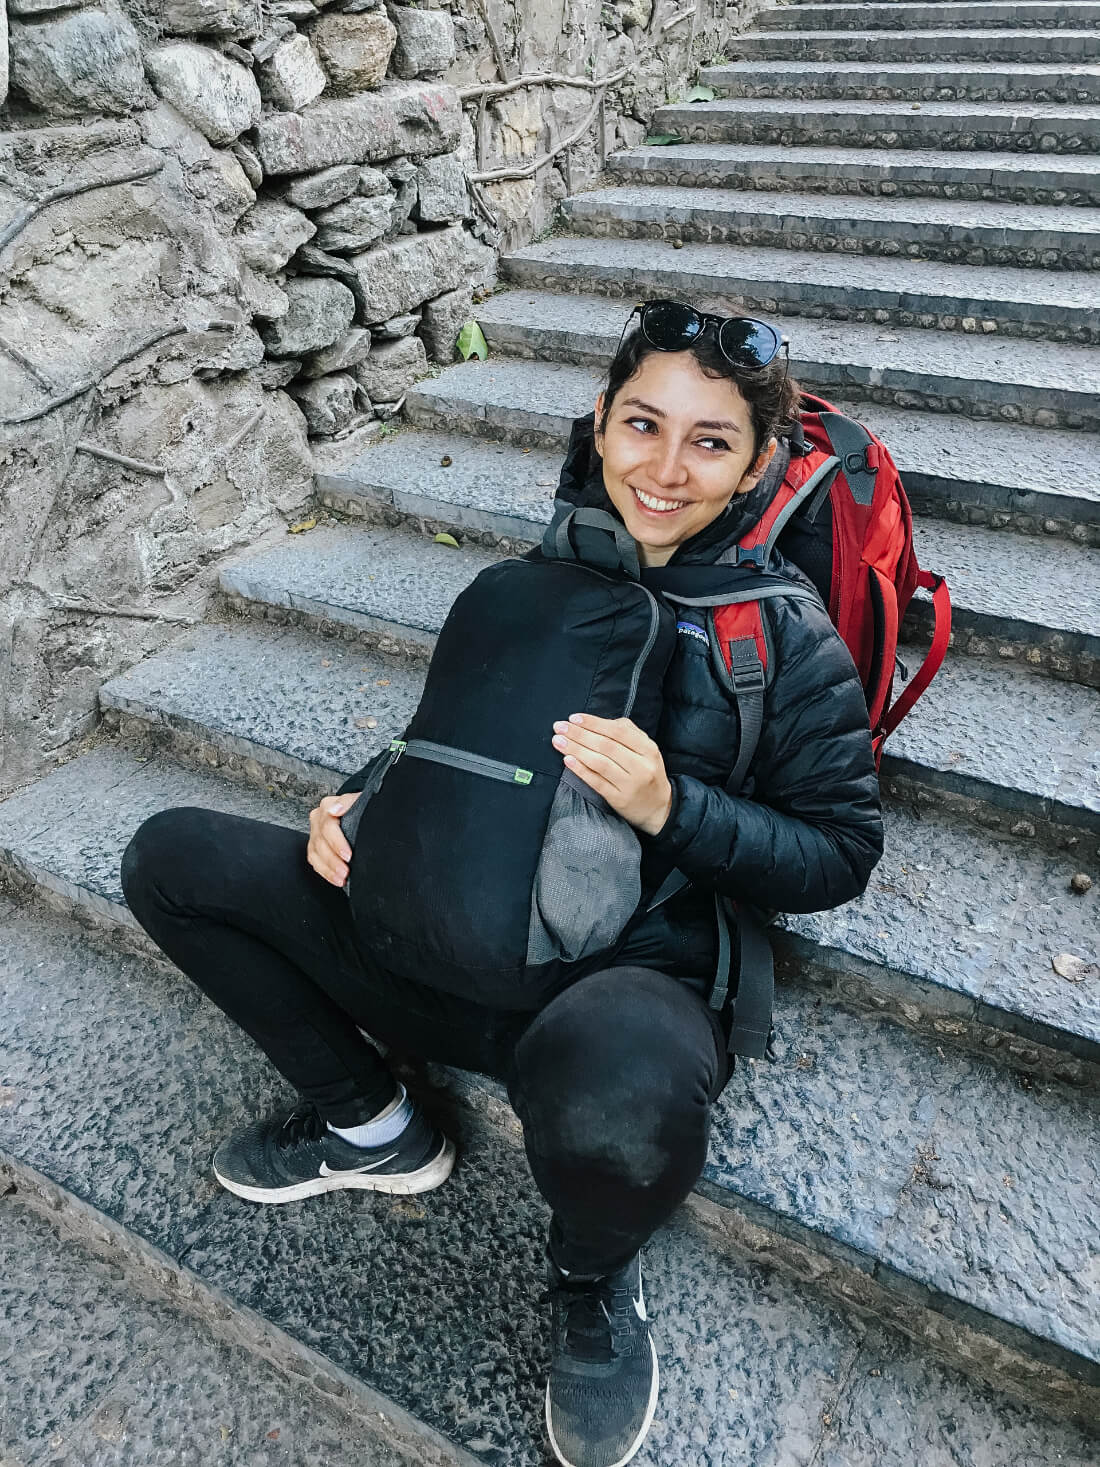 Stacey Valle with a large backpack and another smaller backpack on her front, sitting on a staircase looking exhausted but smiling